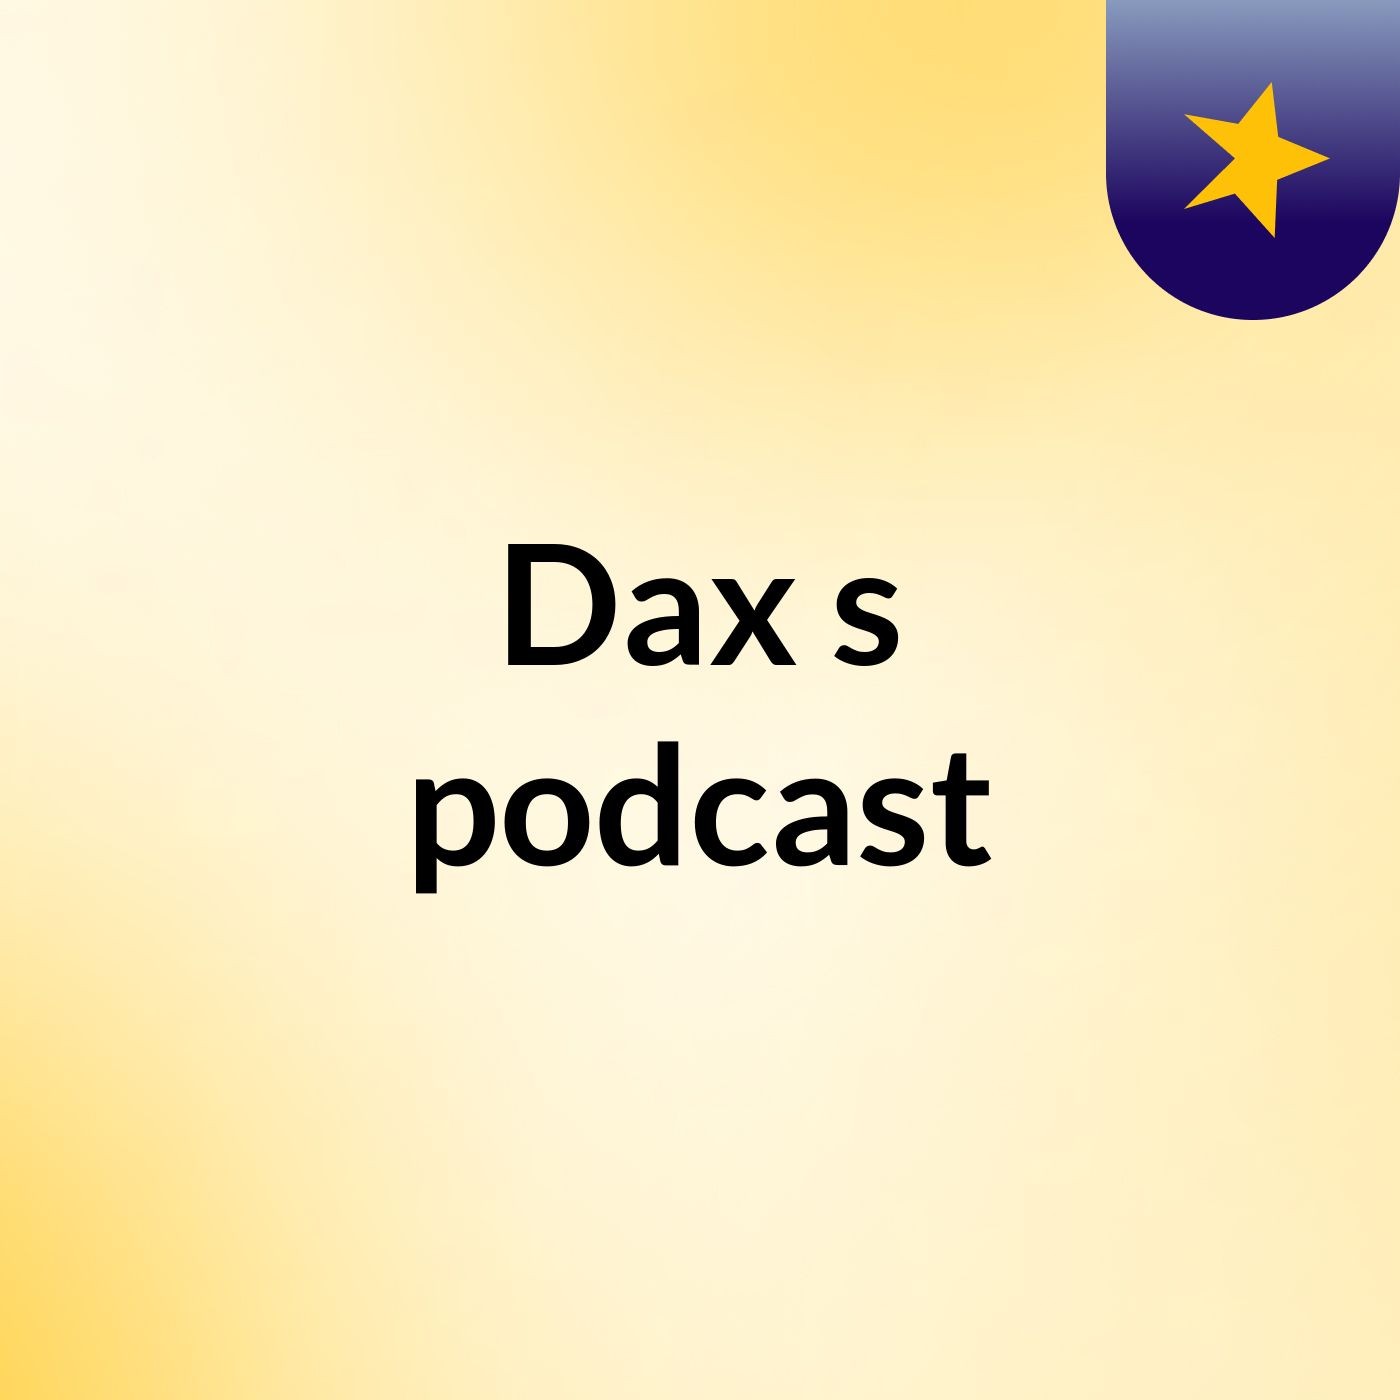 Episode 3 - Dax's podcast